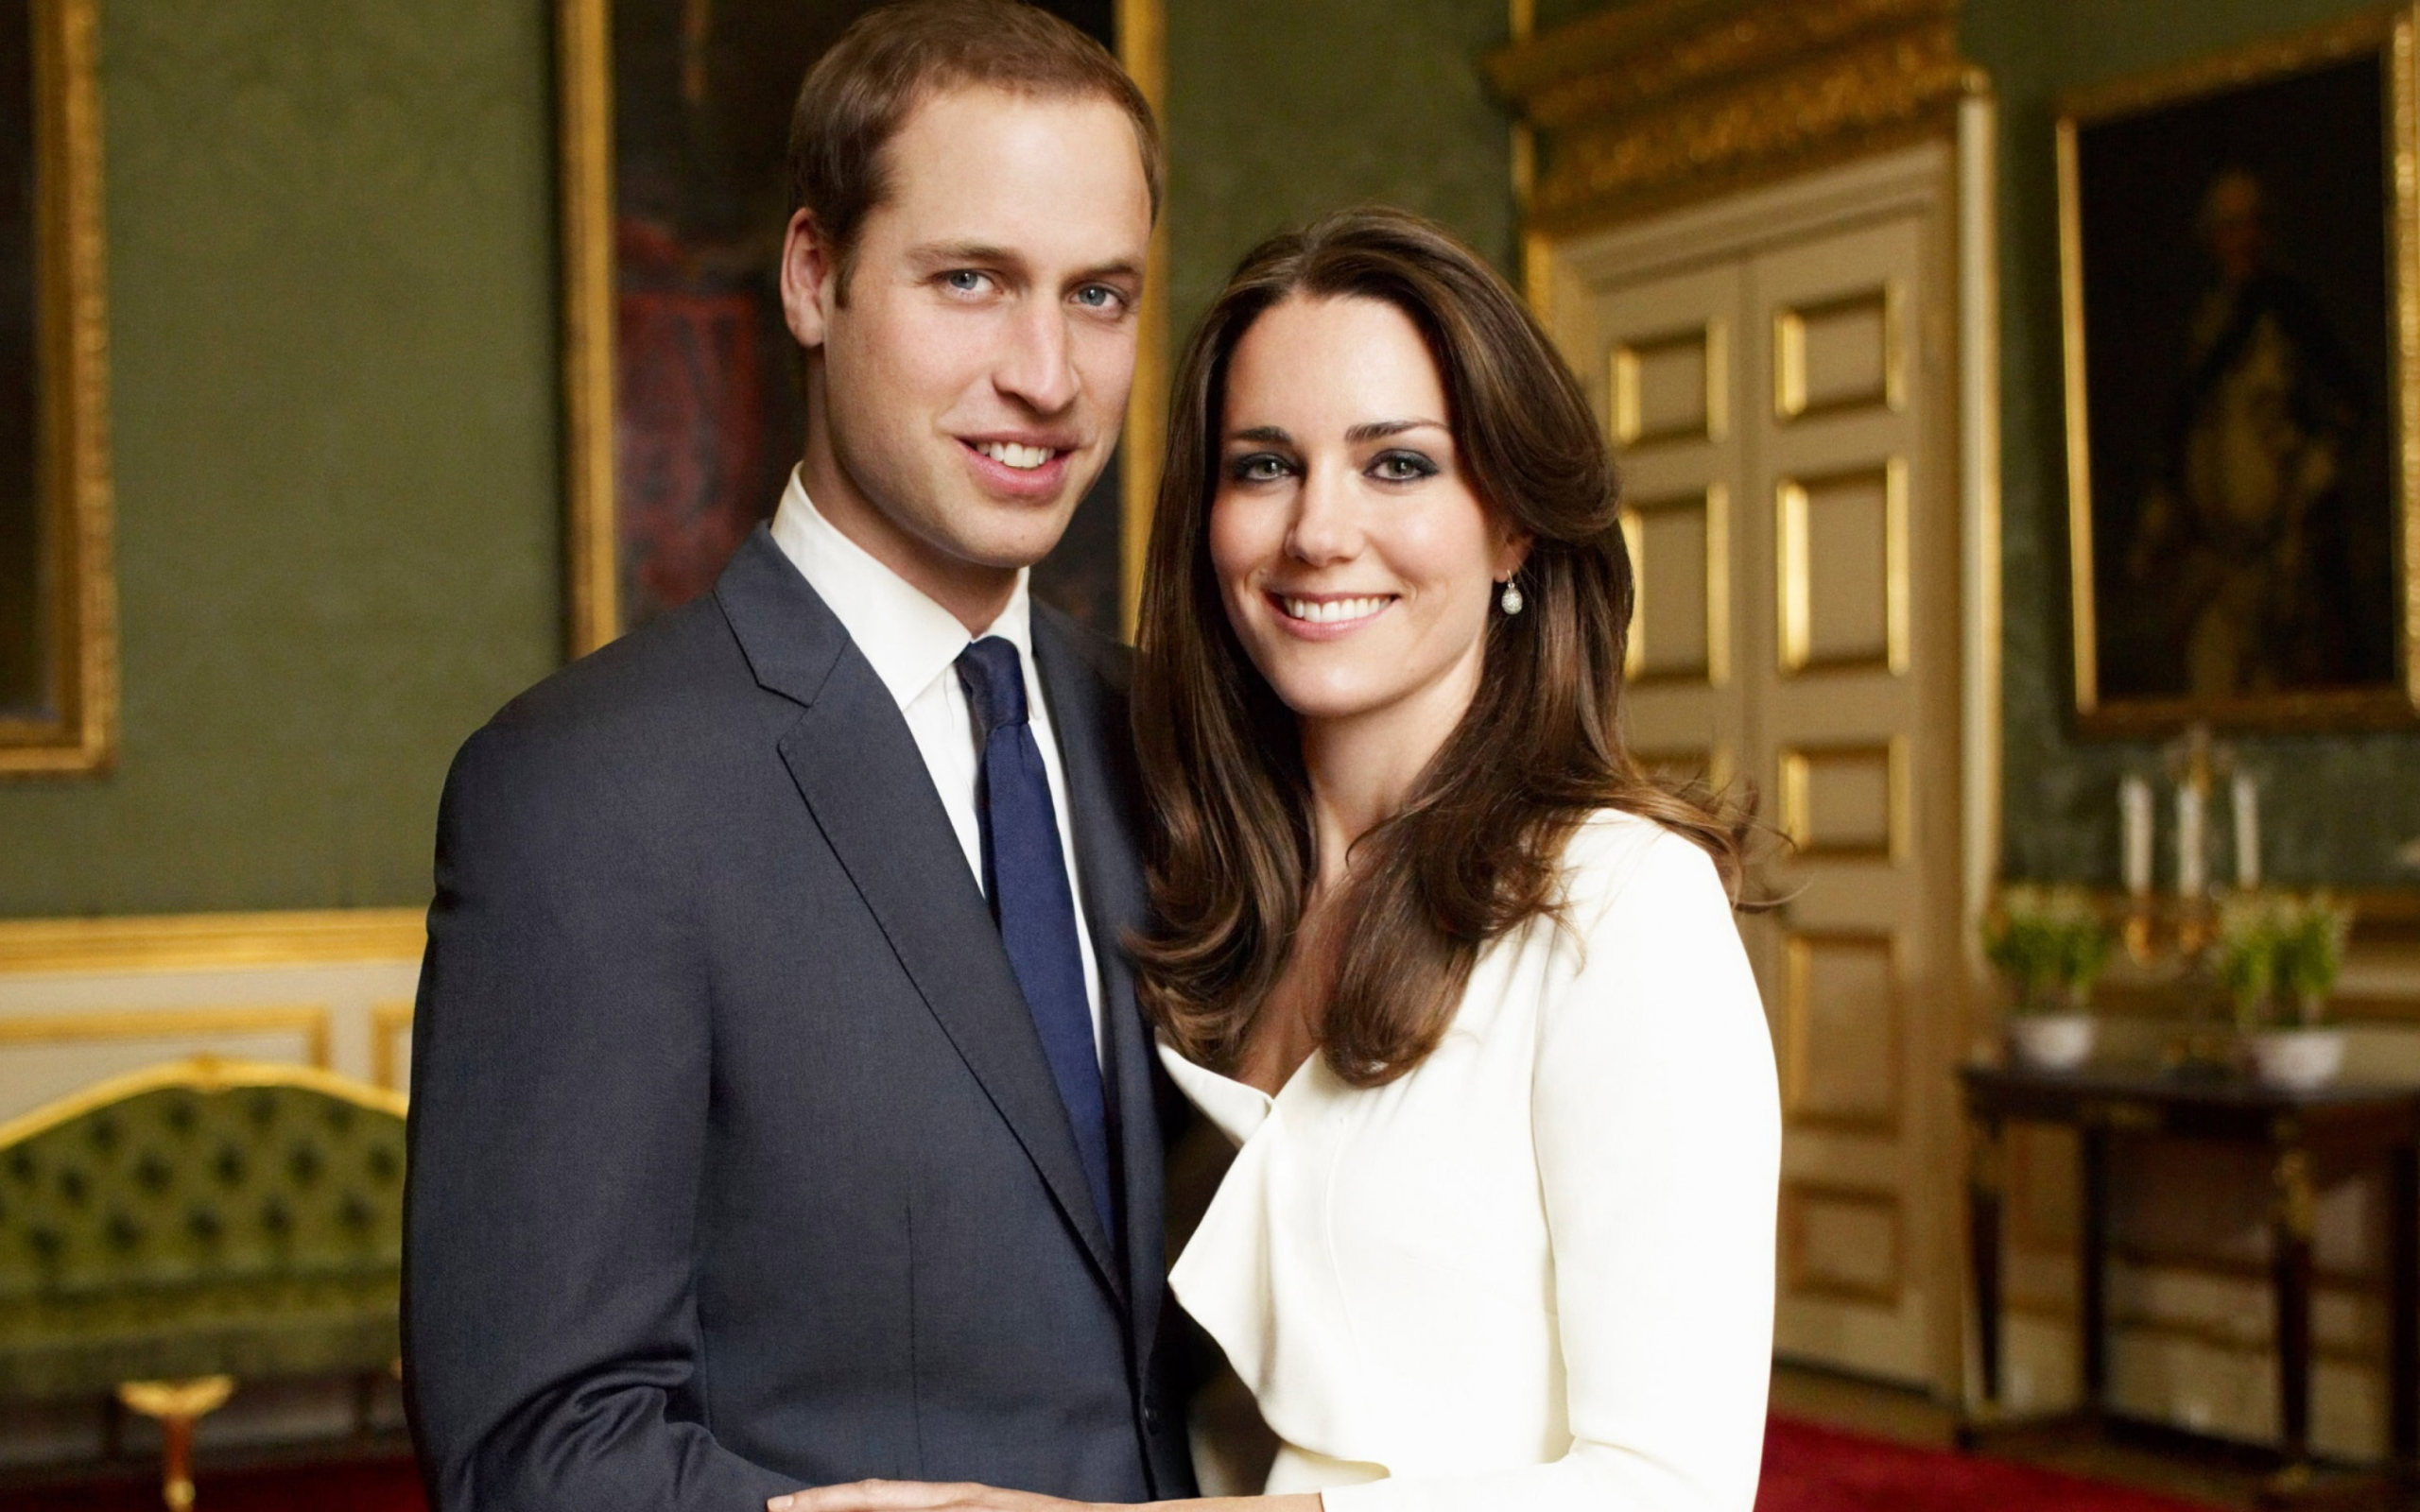 Prince William And Kate Middleton wallpaper 2560x1600